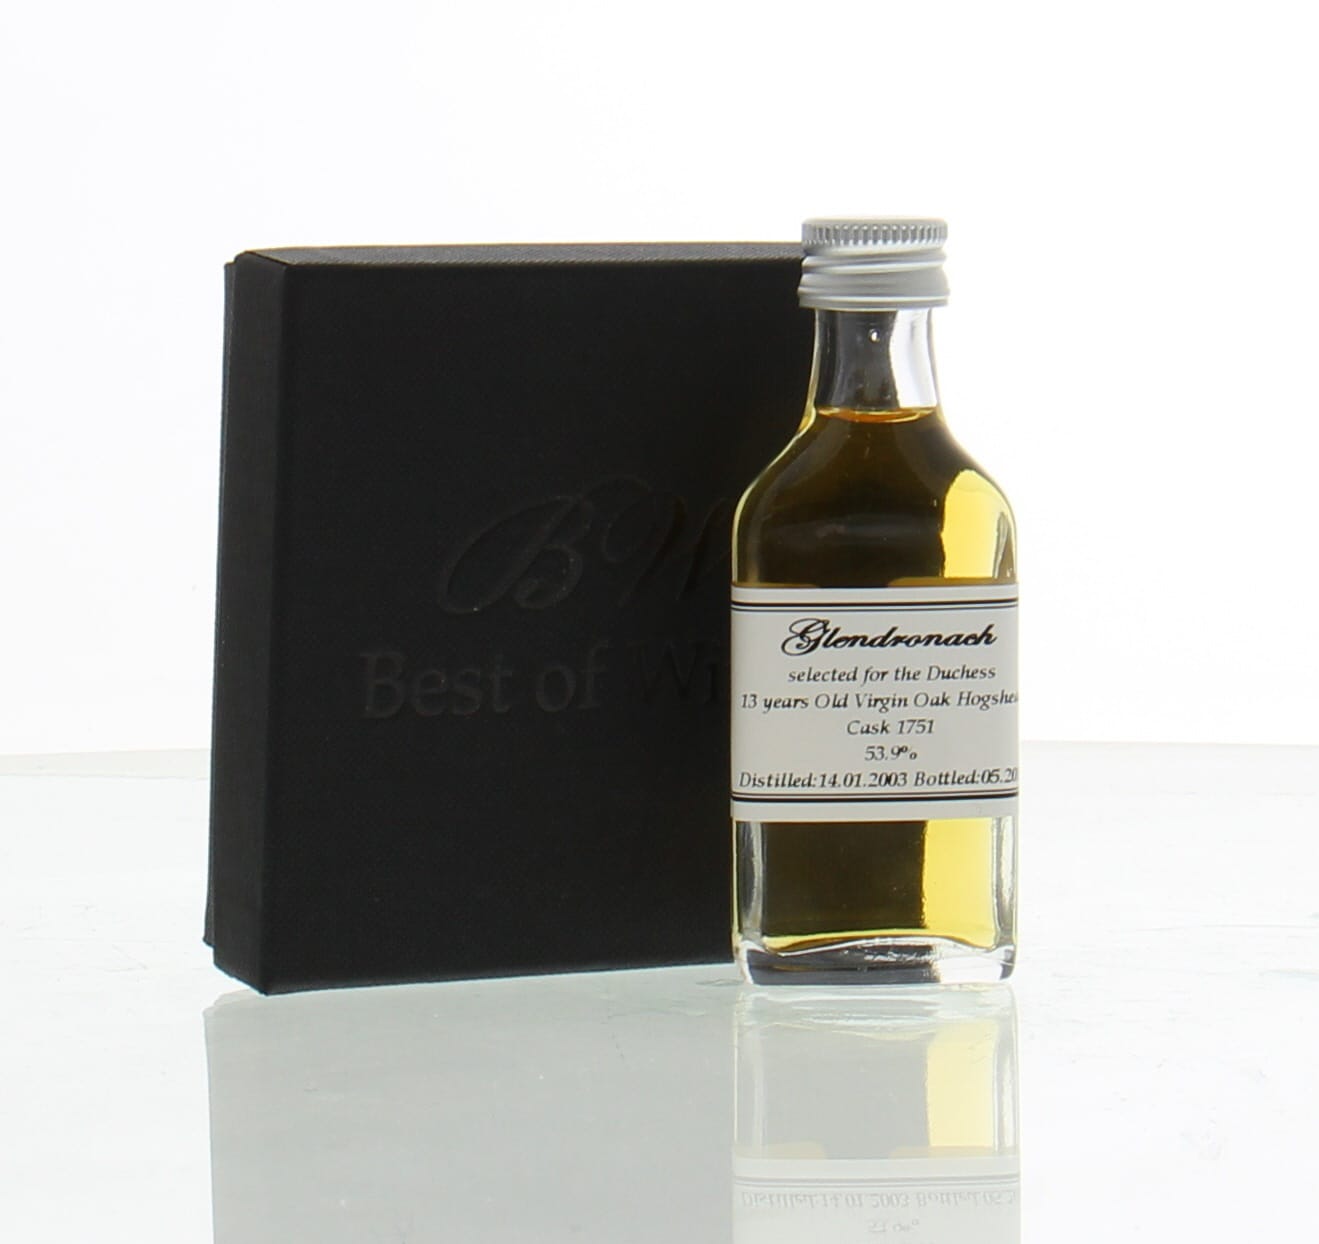 Glendronach - SAMPLE:13 Years Old Virgin Oak Cask:1751 Exclusively for The Duchess 53.9% 2003 In Original Container